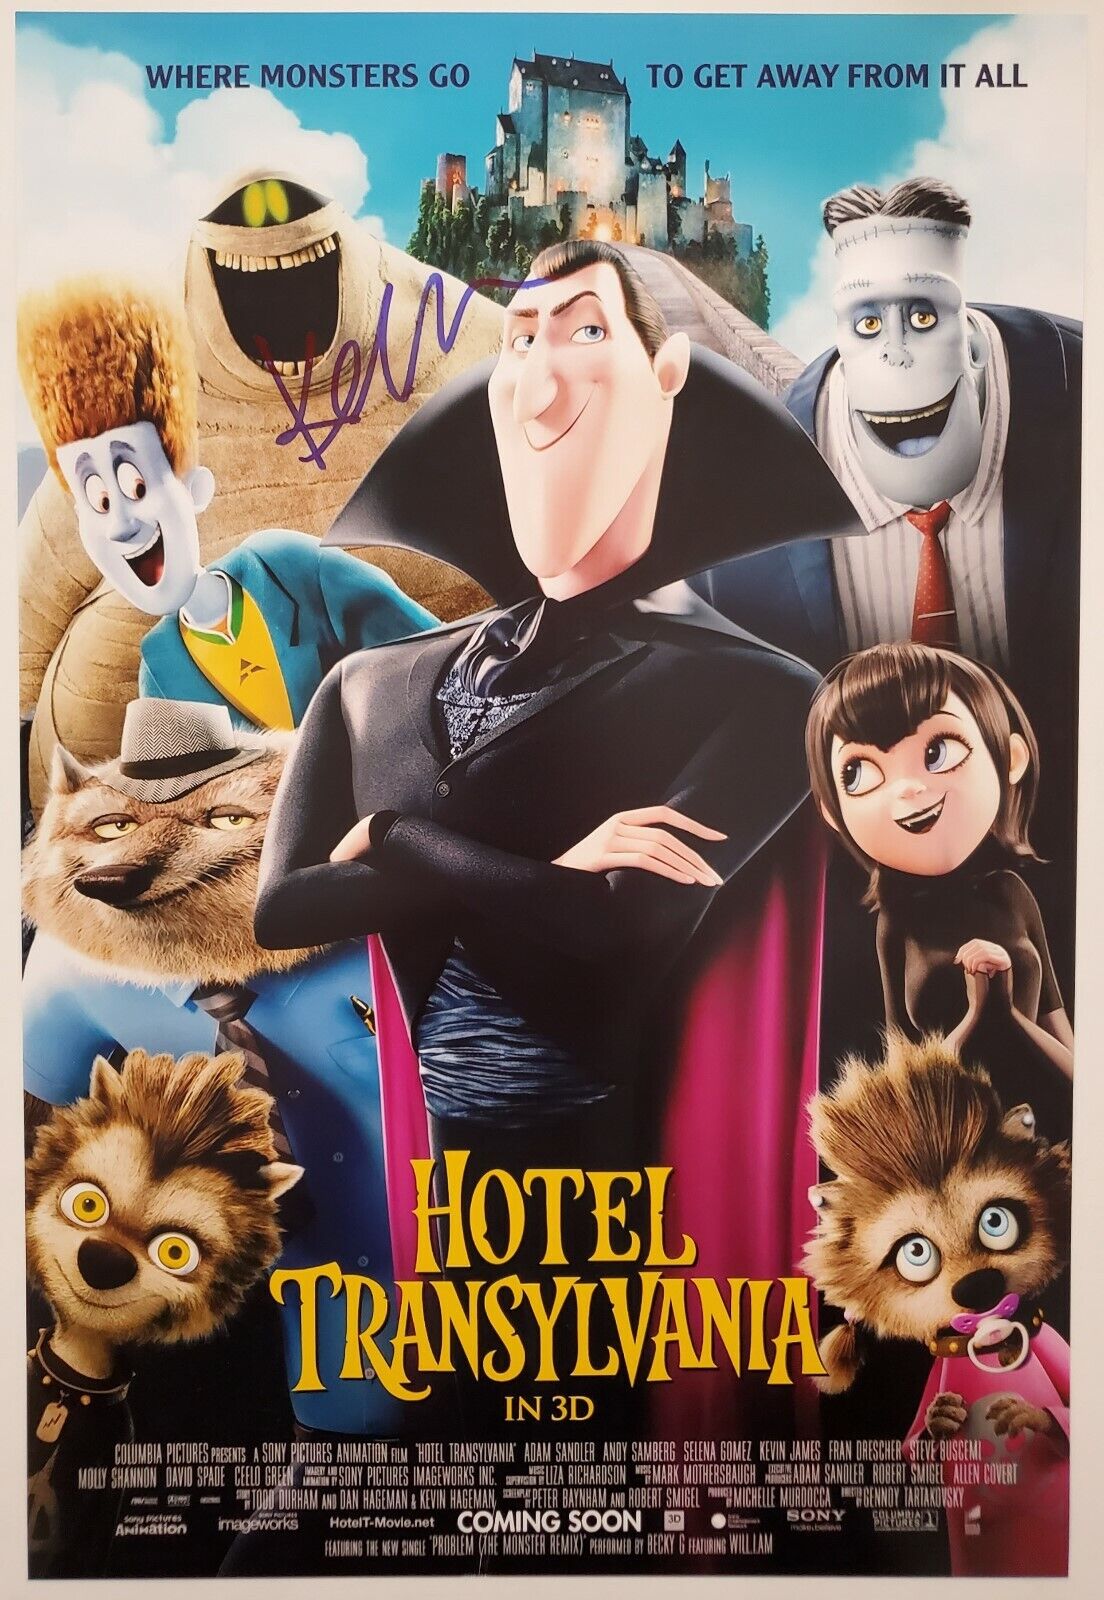 Kevin James Signed Hotel Transylvania 12x18 Movie Poster Zookeeper Mall Cop RAD